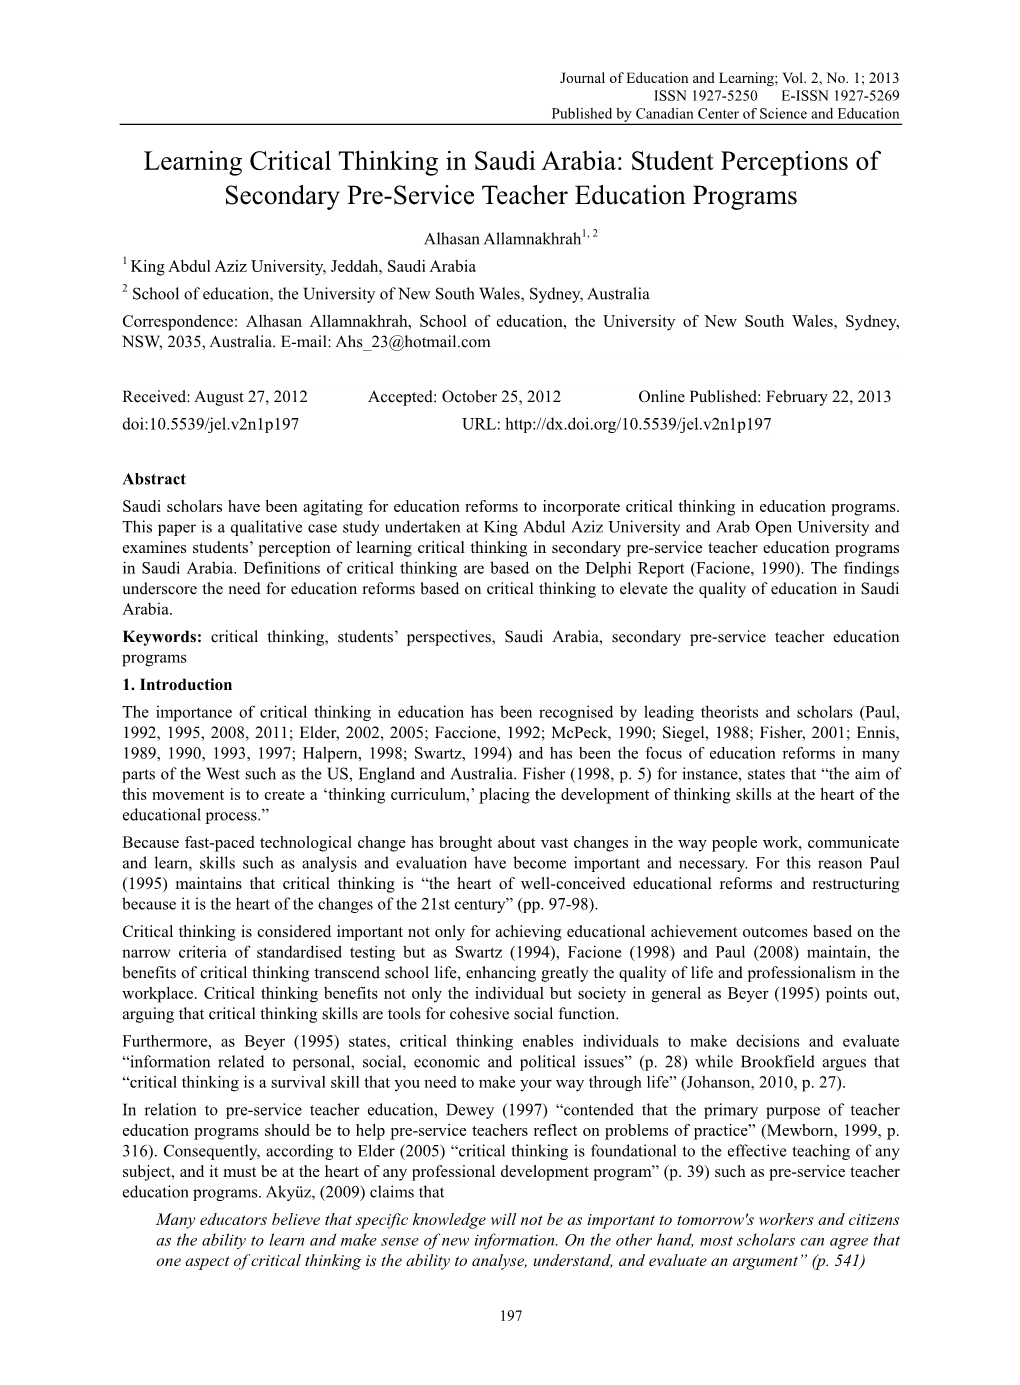 Learning Critical Thinking in Saudi Arabia: Student Perceptions of Secondary Pre-Service Teacher Education Programs